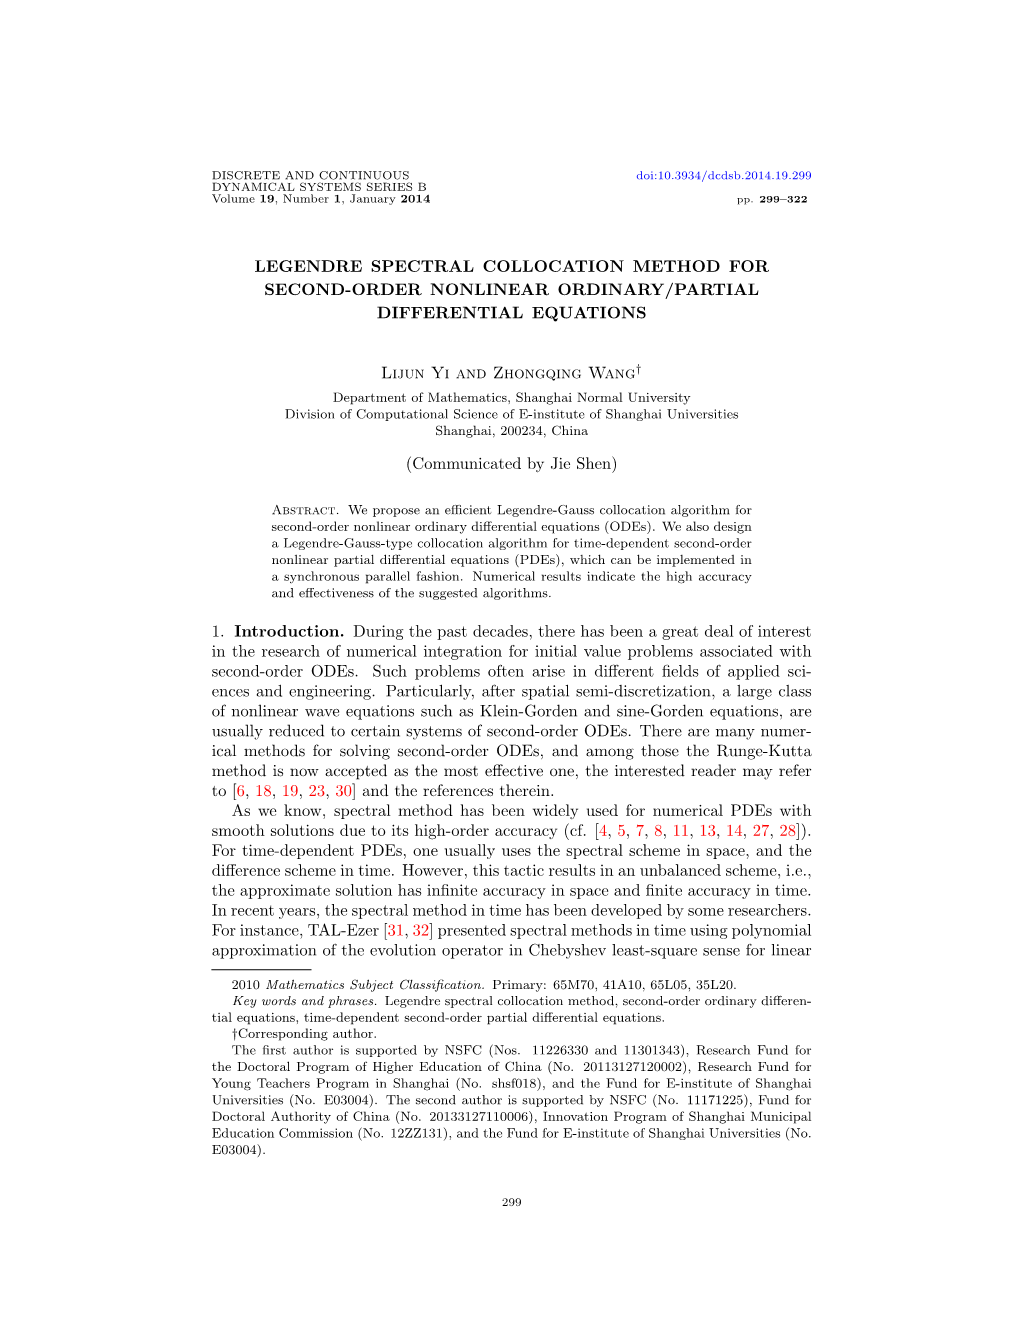 LEGENDRE SPECTRAL COLLOCATION METHOD for SECOND-ORDER NONLINEAR ORDINARY/PARTIAL DIFFERENTIAL EQUATIONS Lijun Yi and Zhongqing W